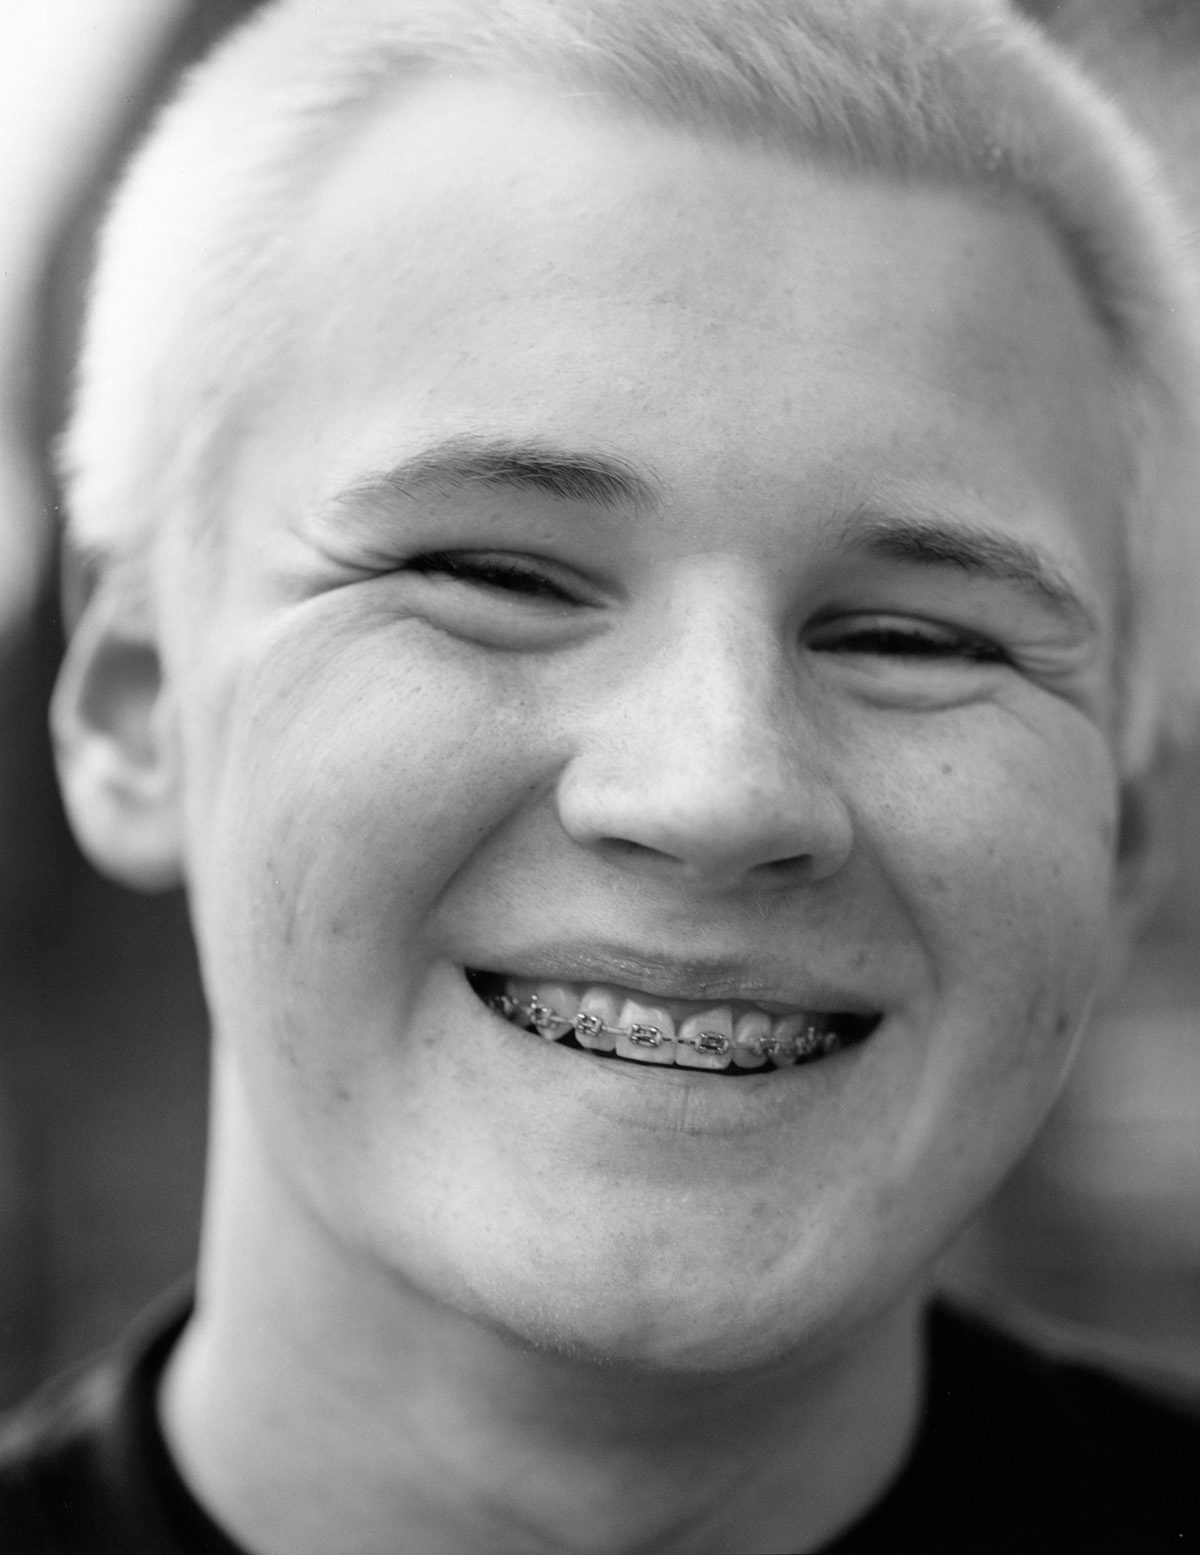 Black and white photo of a young person with light cropped hair and braces smiling at the camera